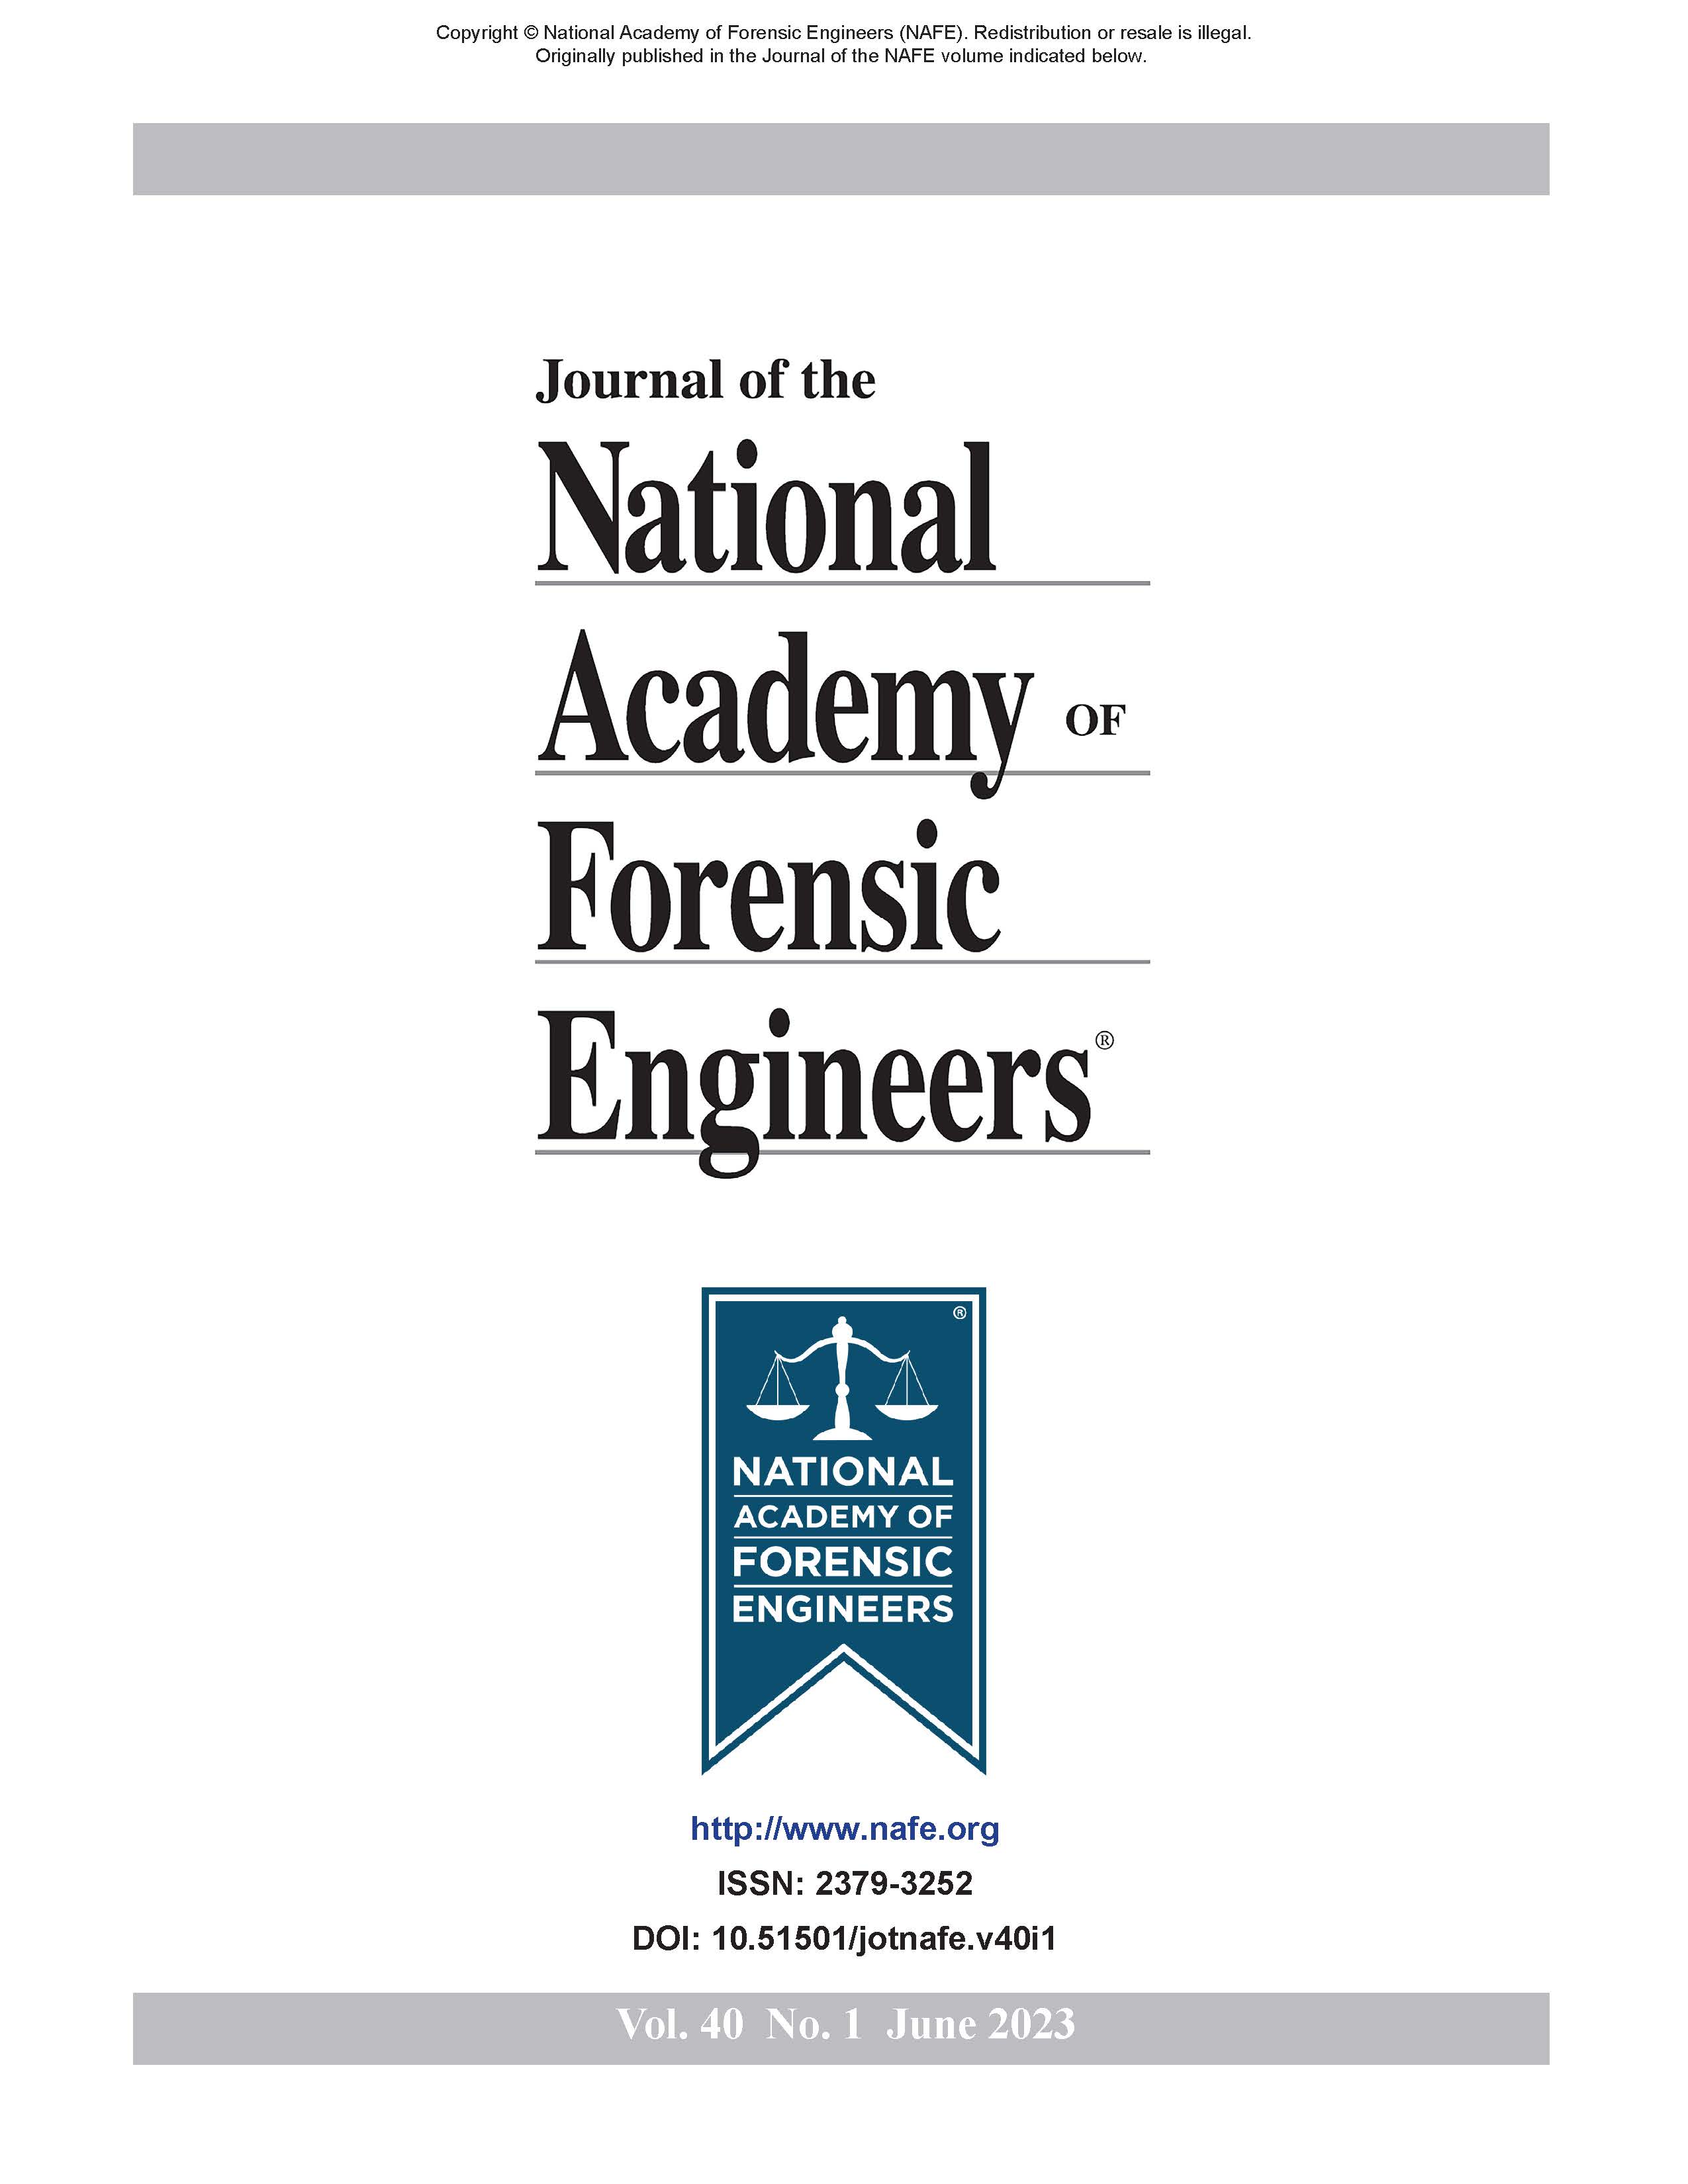 					View Vol. 40 No. 1 (2023): Journal of the National Academy of Forensic Engineers
				